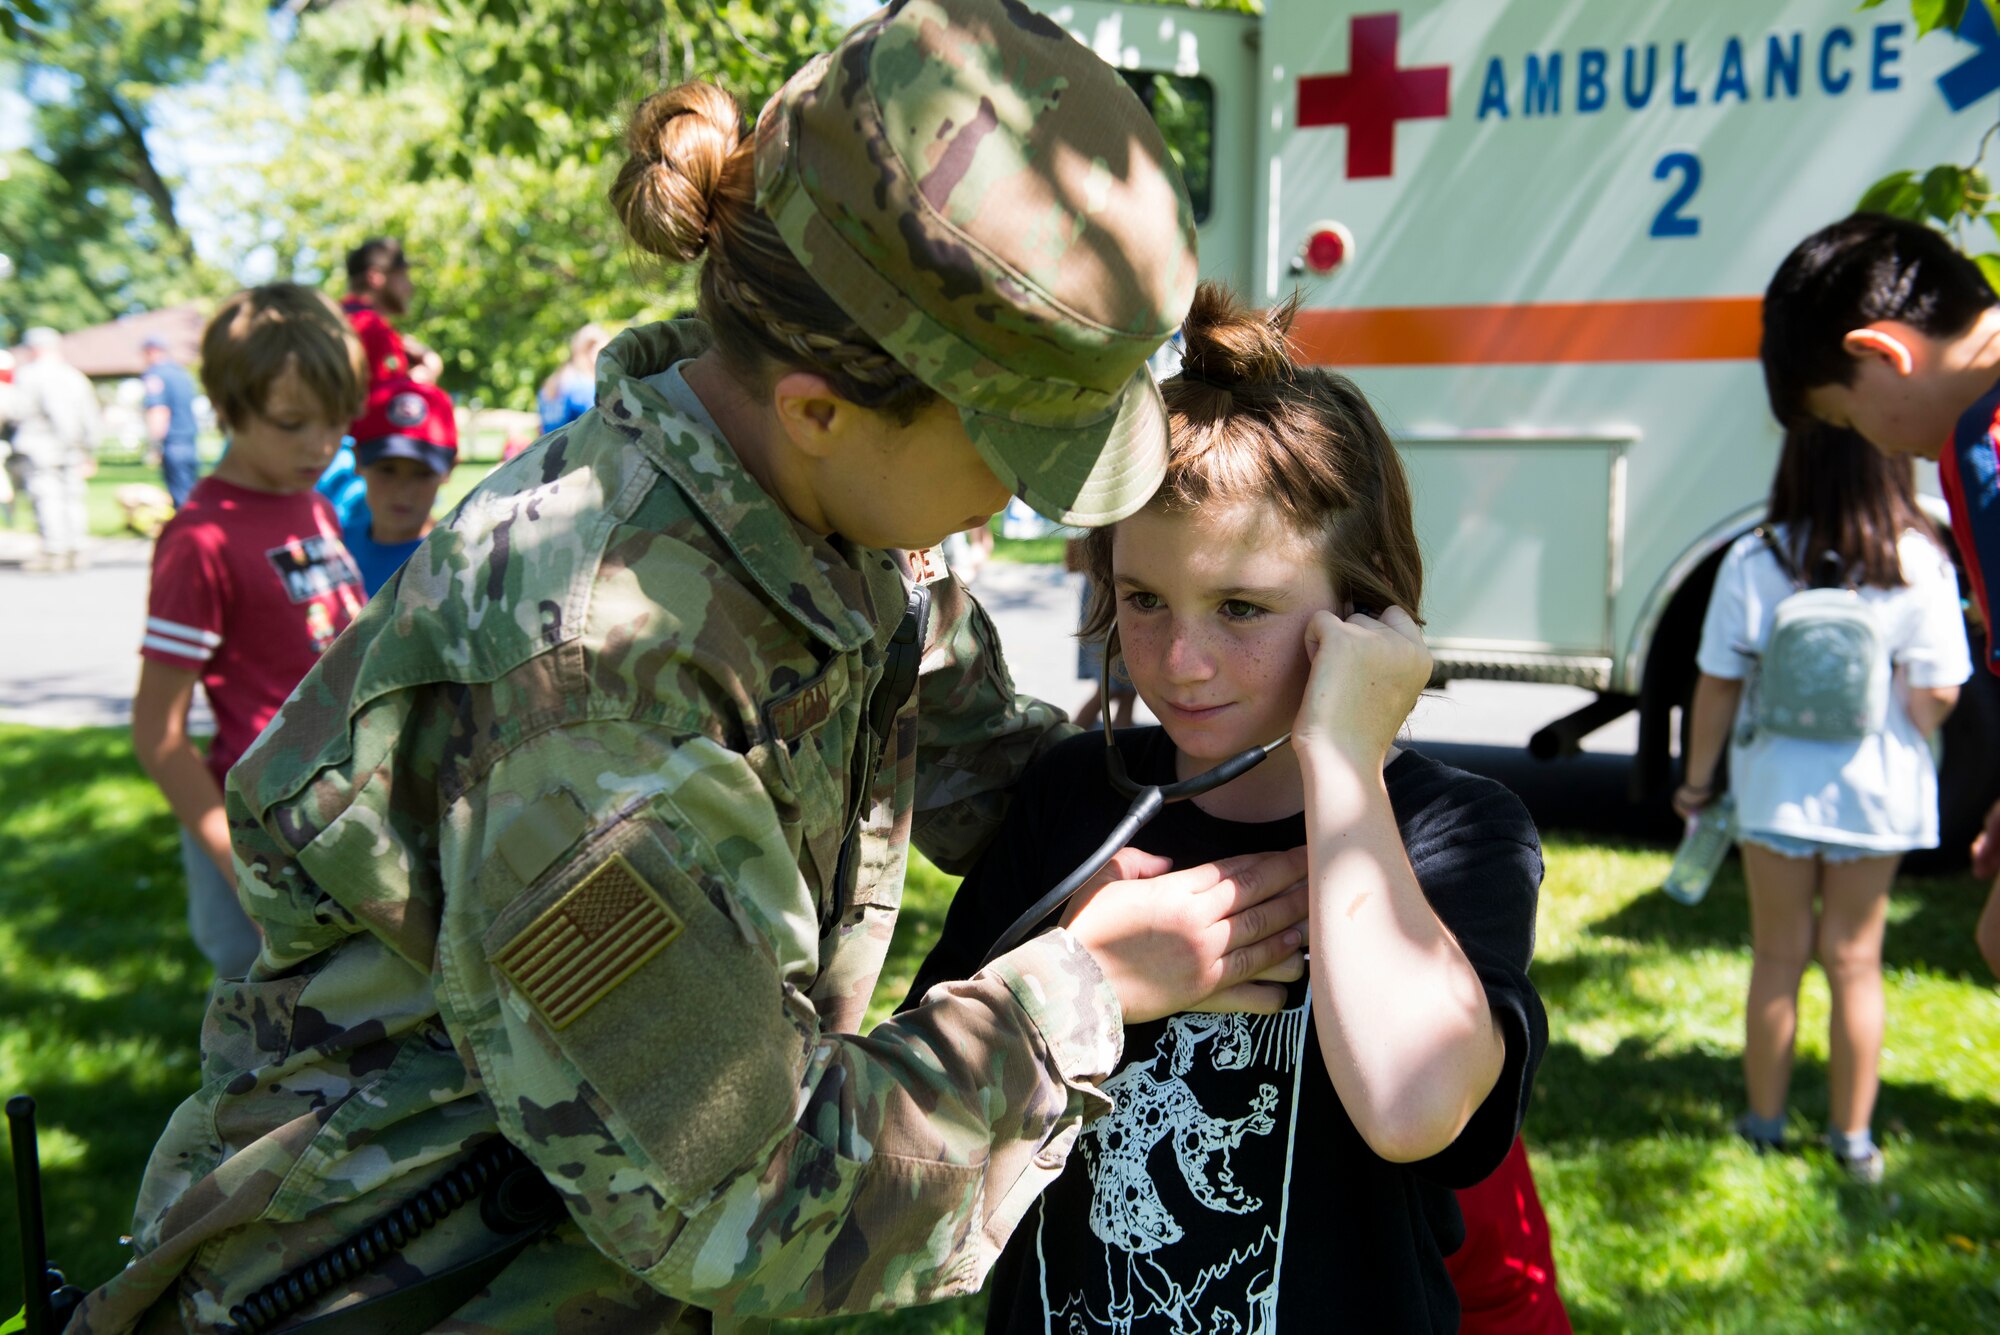 U.S. Air Force Staff Sgt. Sara Huston, 92nd Health Care Operations Squadron medical technician, shows a kid how to use a stethoscope during the Summer Youth Fair at Fairchild Air Force Base, Washington, July 25, 2019. Approximately 100 children from across Fairchild participated in the fair. (U.S. Air Force photo by Airman 1st Class Lawrence Sena)